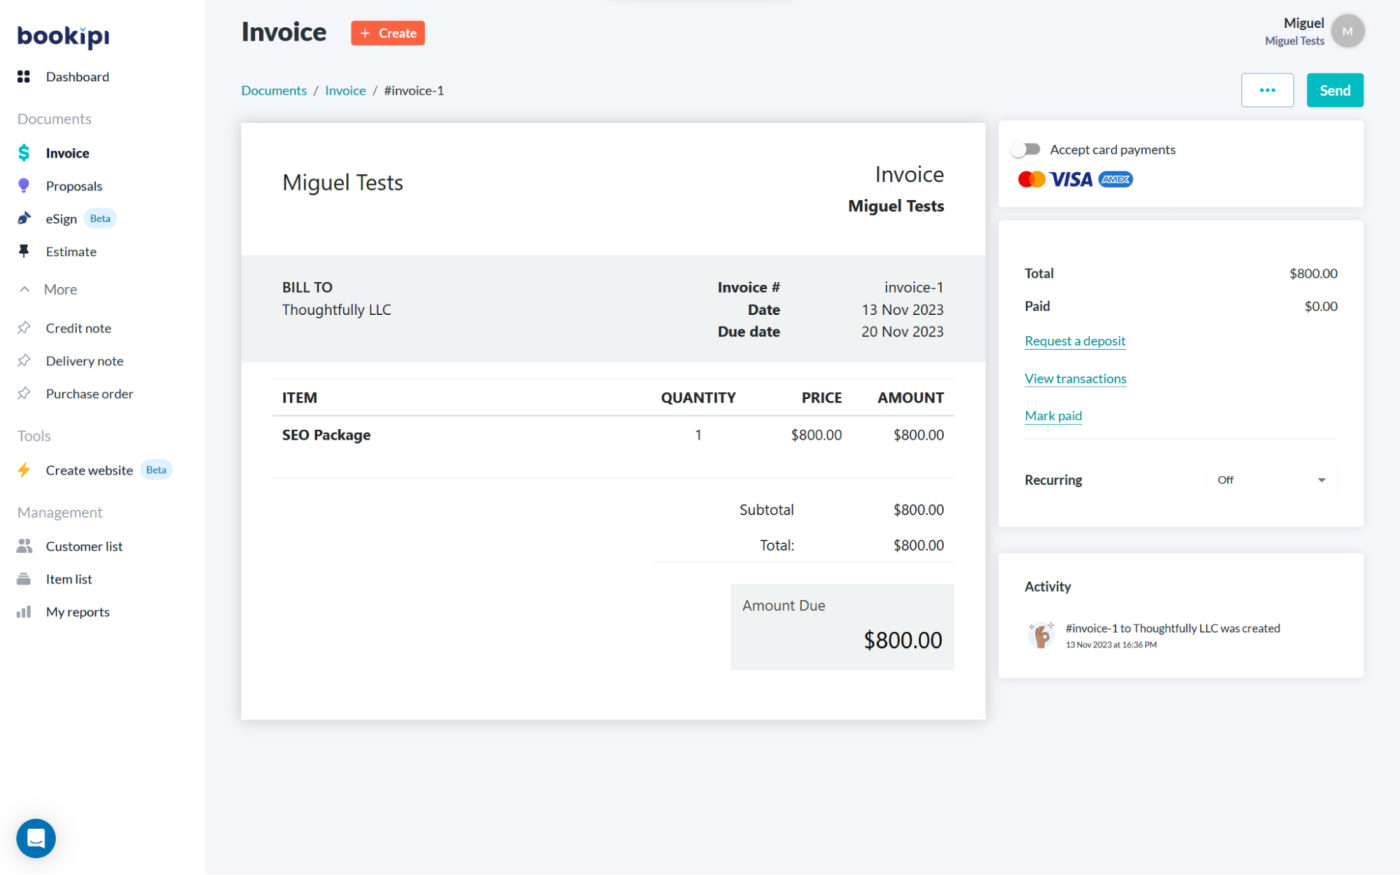 Bookipi, our pick for the best invoice app for sending invoices from Gmail